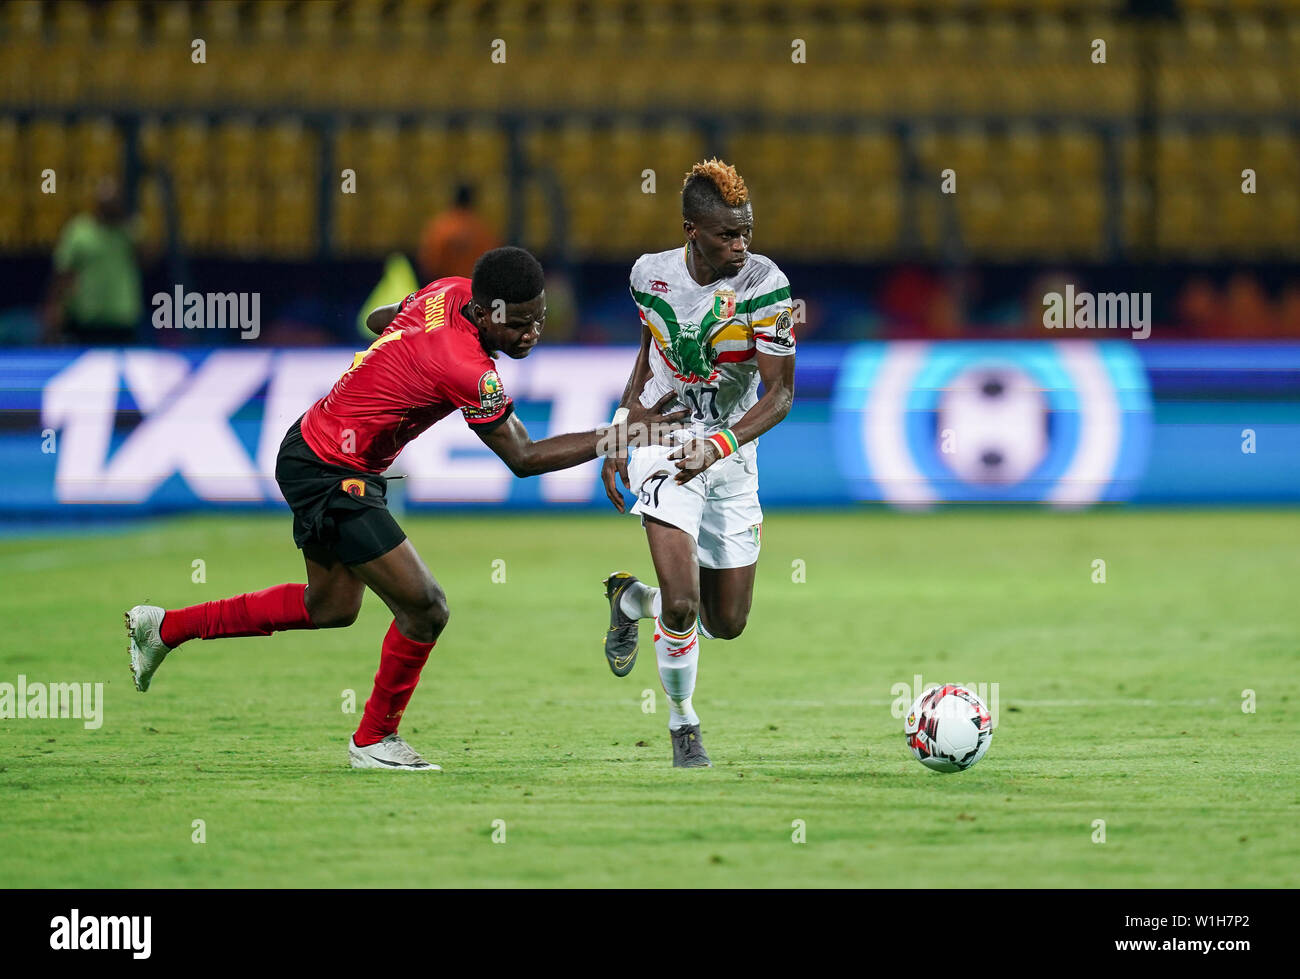 Ismailia, Egypt. 2nd July, 2019. Falaye Sacko of Mali during the 2019 African Cup of Nations match between Angola and Mali at the Ismailia Stadium in Ismailia, Egypt. Ulrik Pedersen/CSM/Alamy Live News Stock Photo